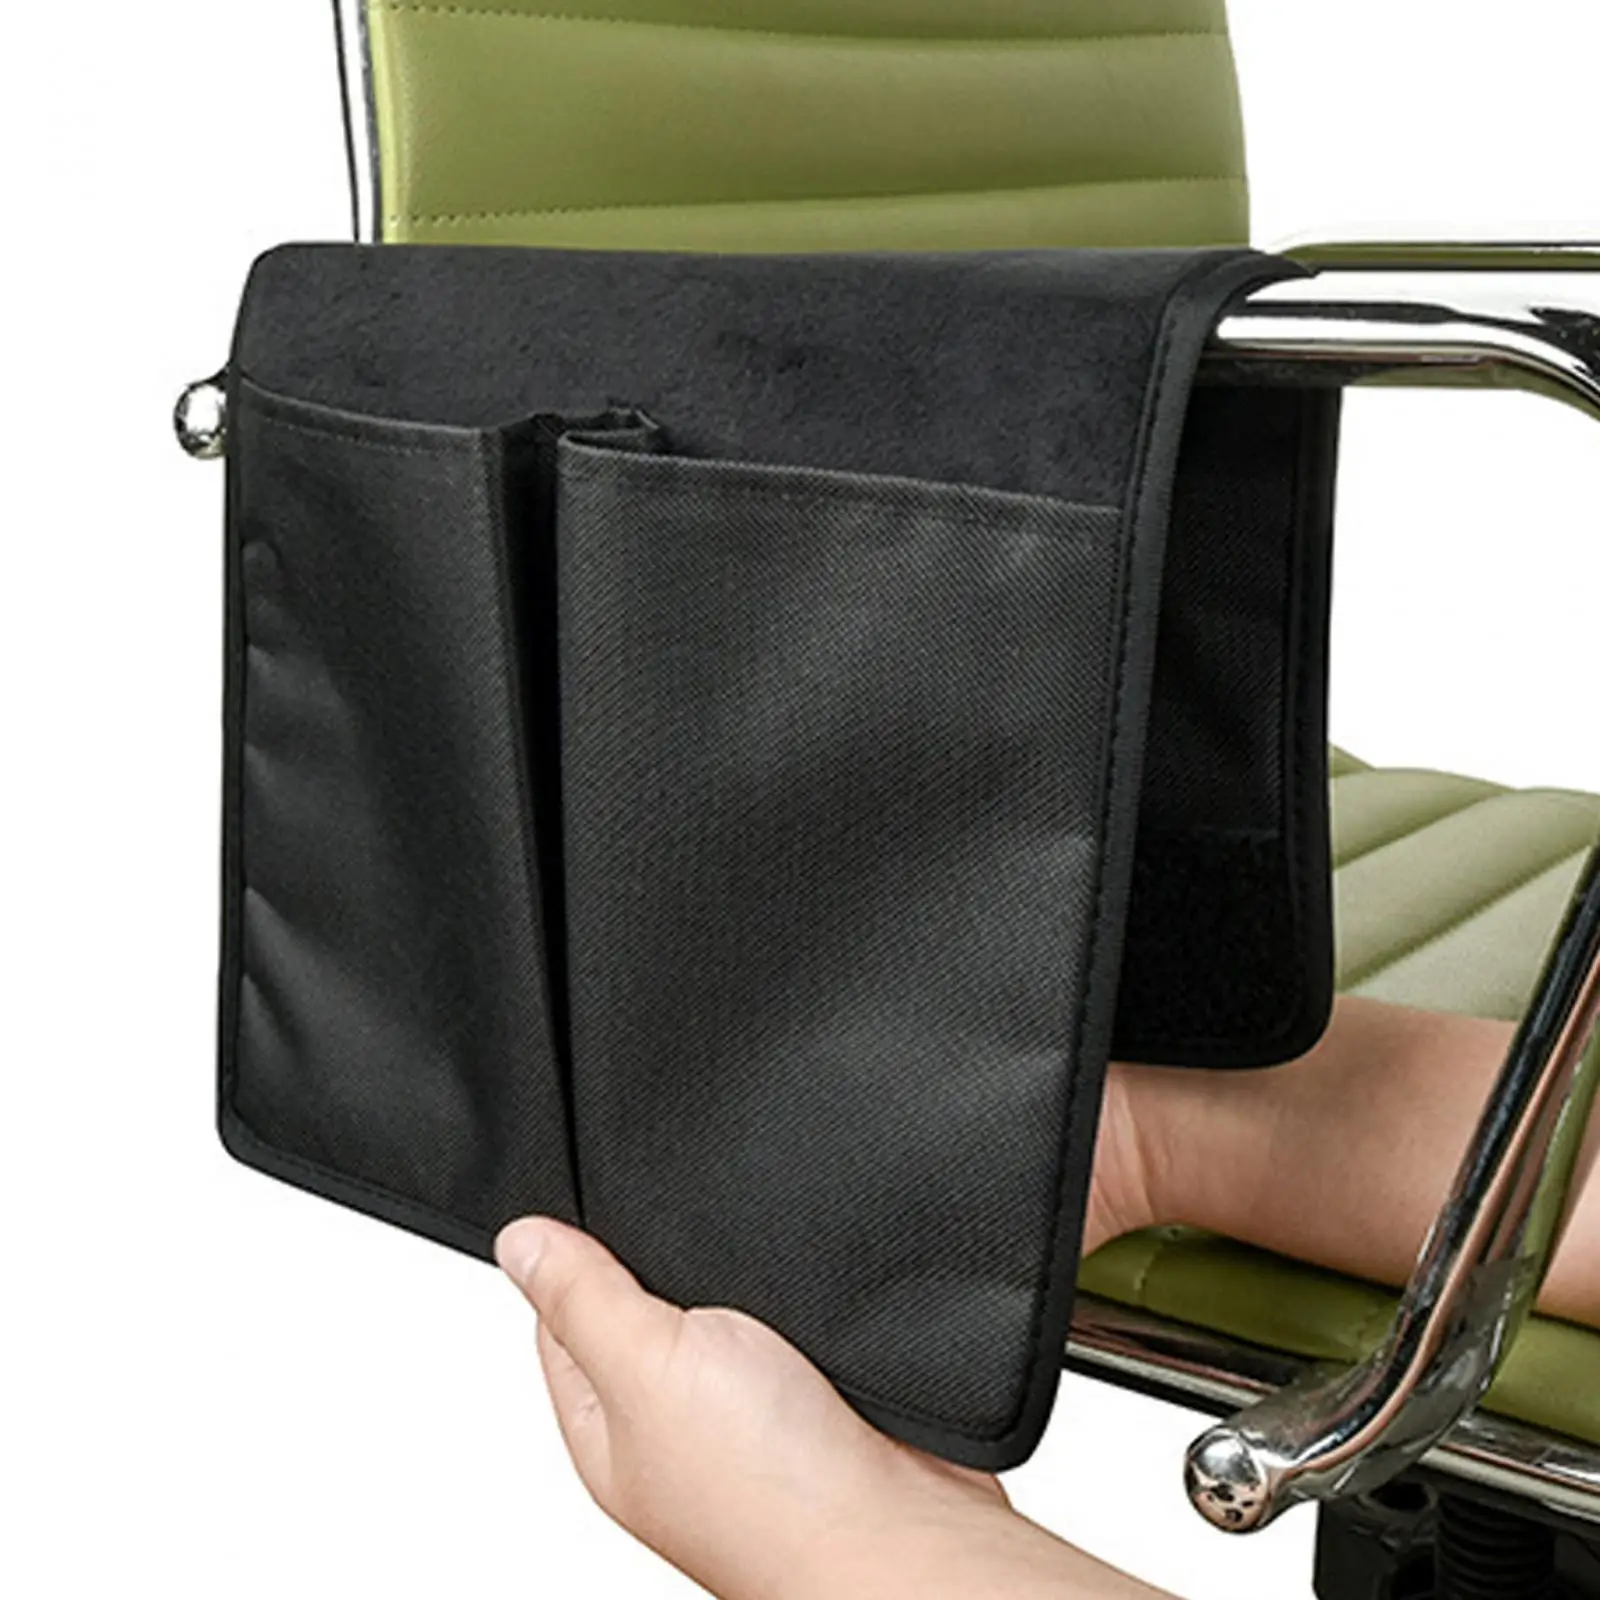 Chair Side Bag Accessories Bag Accessories Pouch Phone Holder Bag Multi Pockets Wheelchair Side Pouch for Phone Remotes Glasses